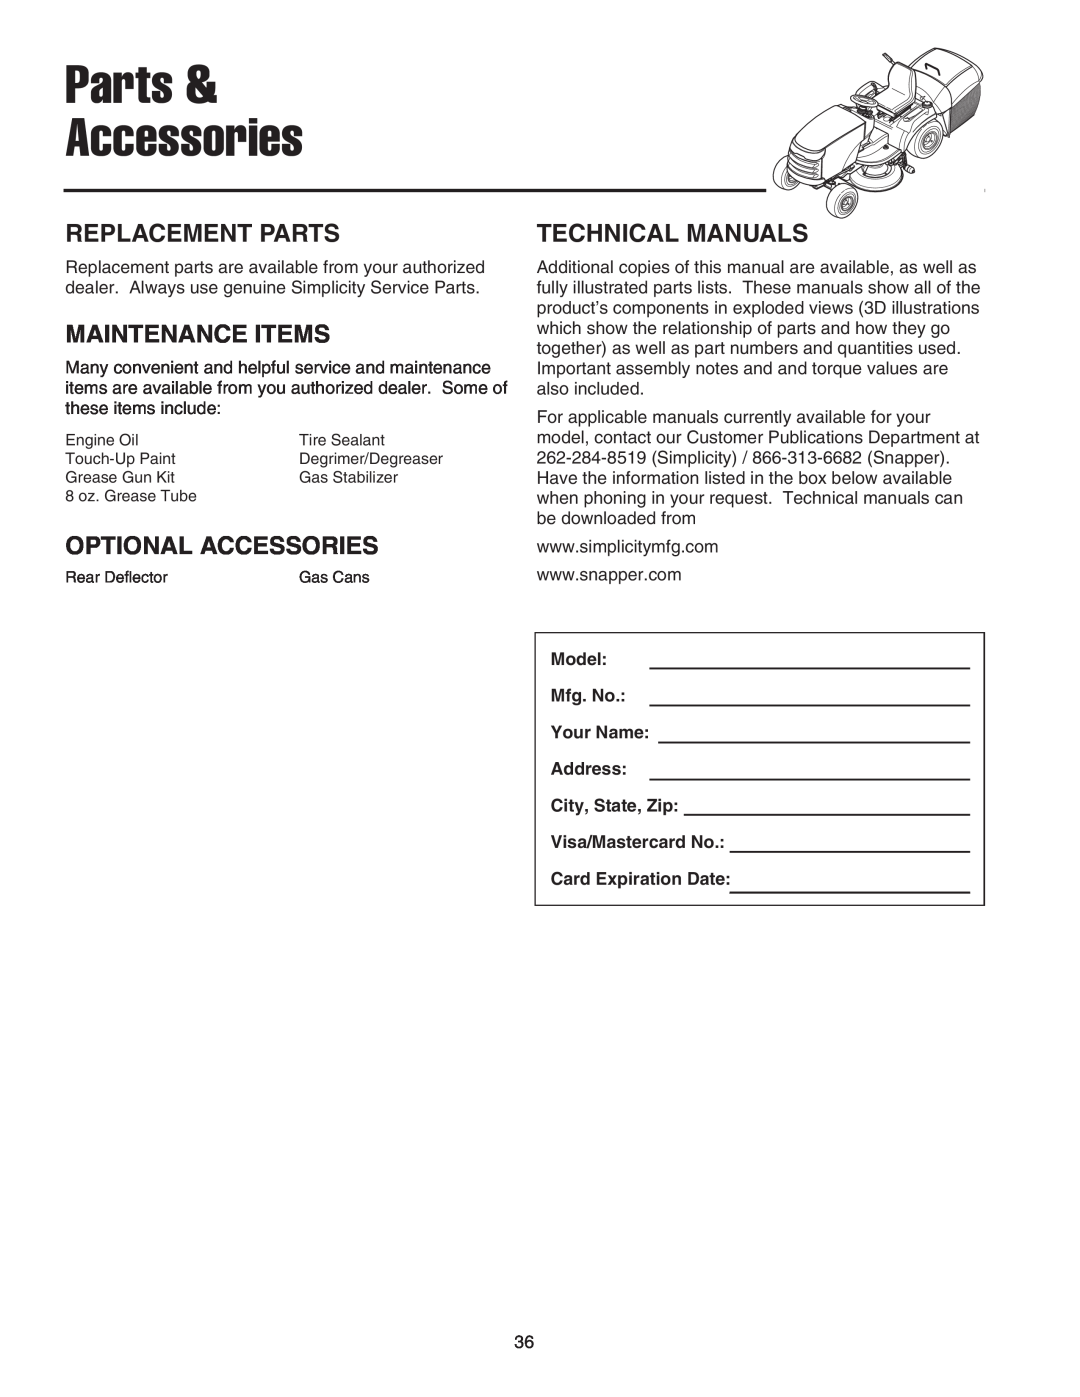 Snapper 2400 XL manual Parts & Accessories, Replacement Parts, Maintenance Items, Technical Manuals, Optional Accessories 